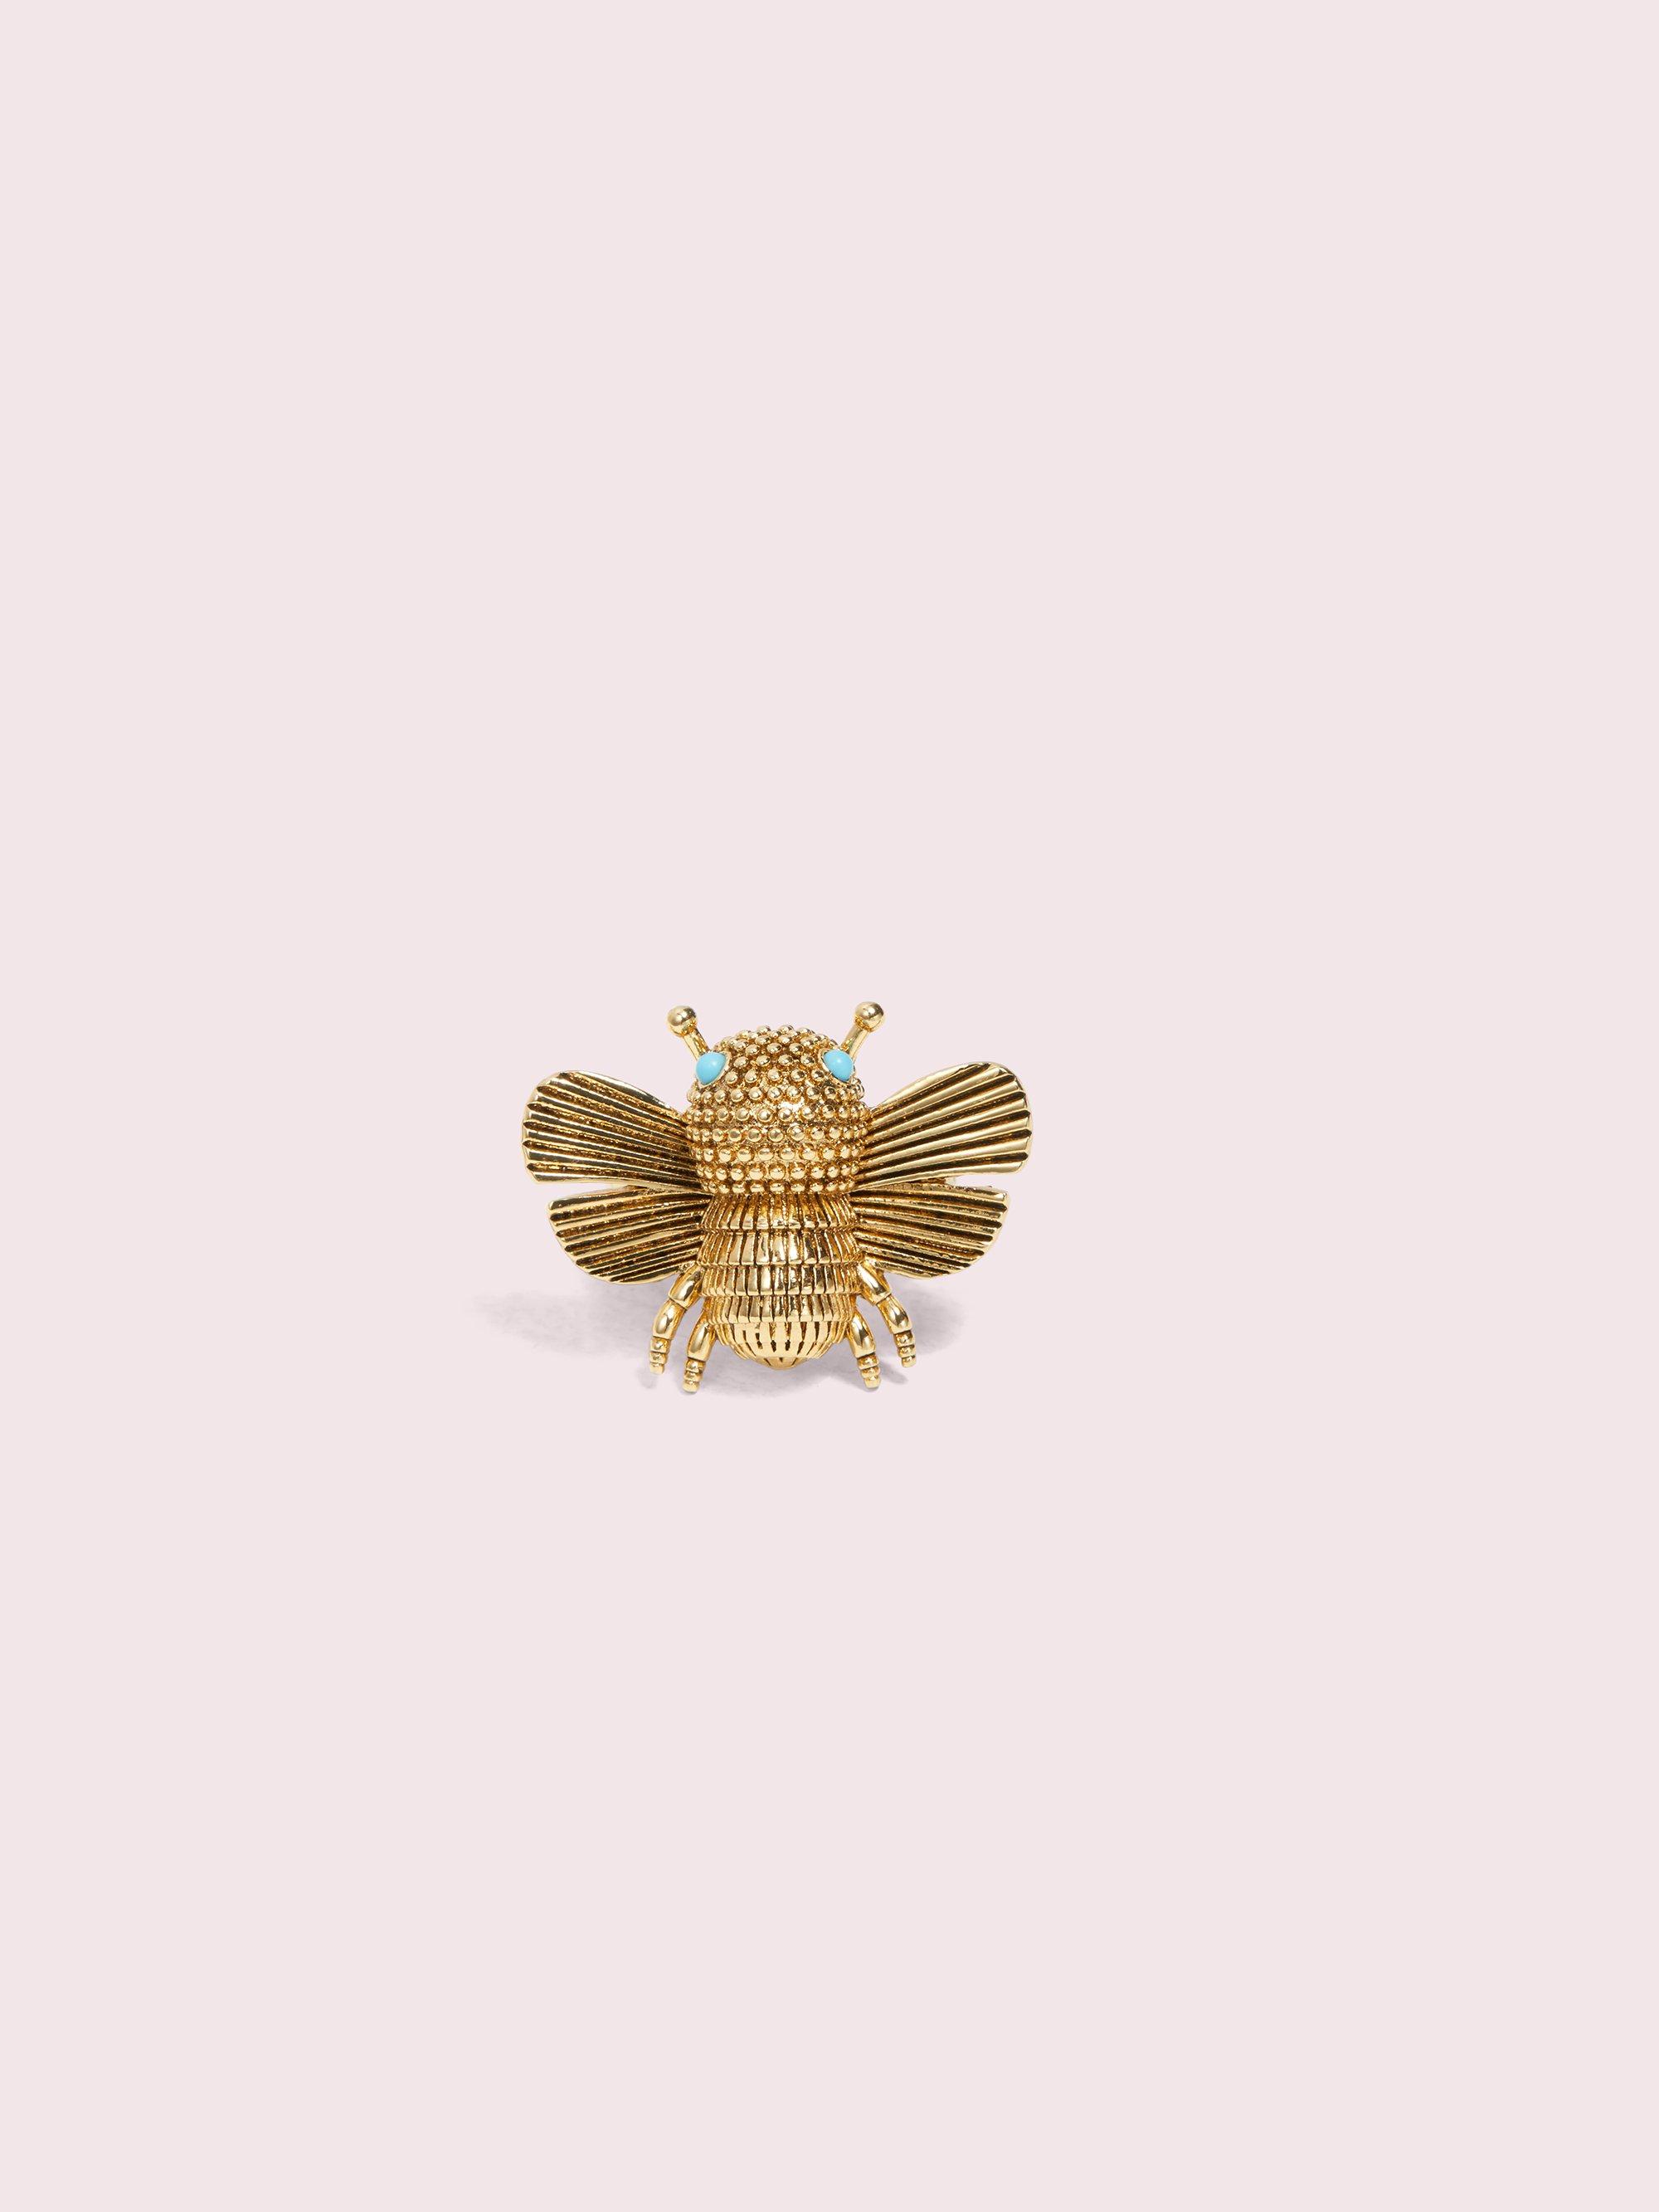 Kate Spade All Abuzz Bee Ring - Worn Gold - J1/2 (us 5) - Lyst